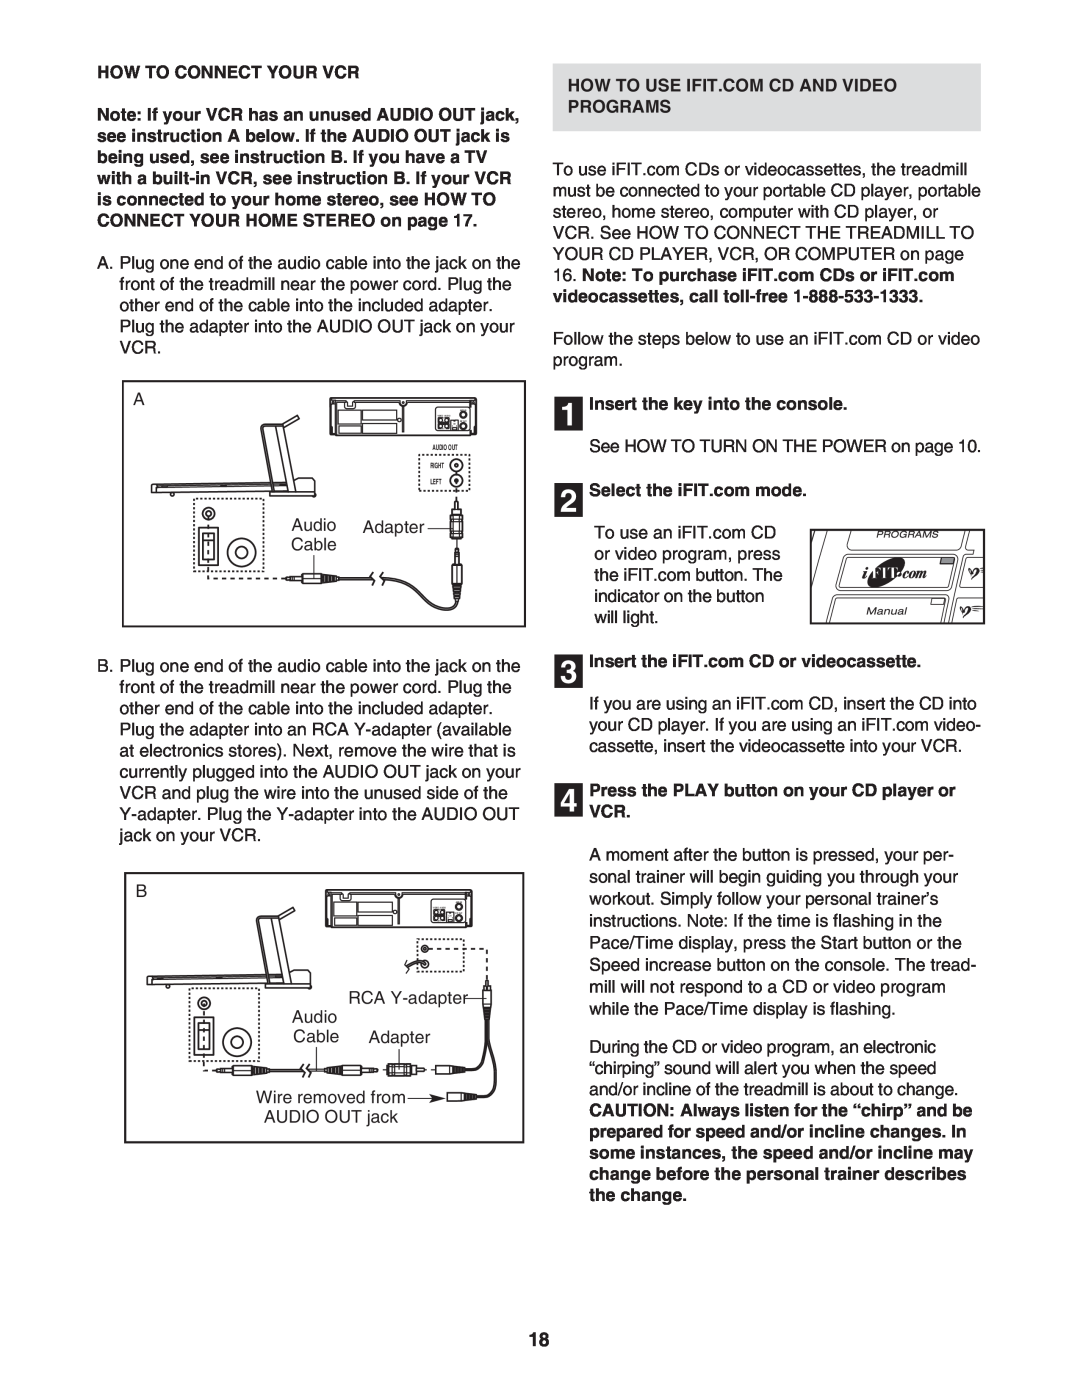 ProForm DTL73942 user manual How To Connect Your Vcr, How To Use Ifit.Com Cd And Video Programs, Audio, Adapter, Cable 